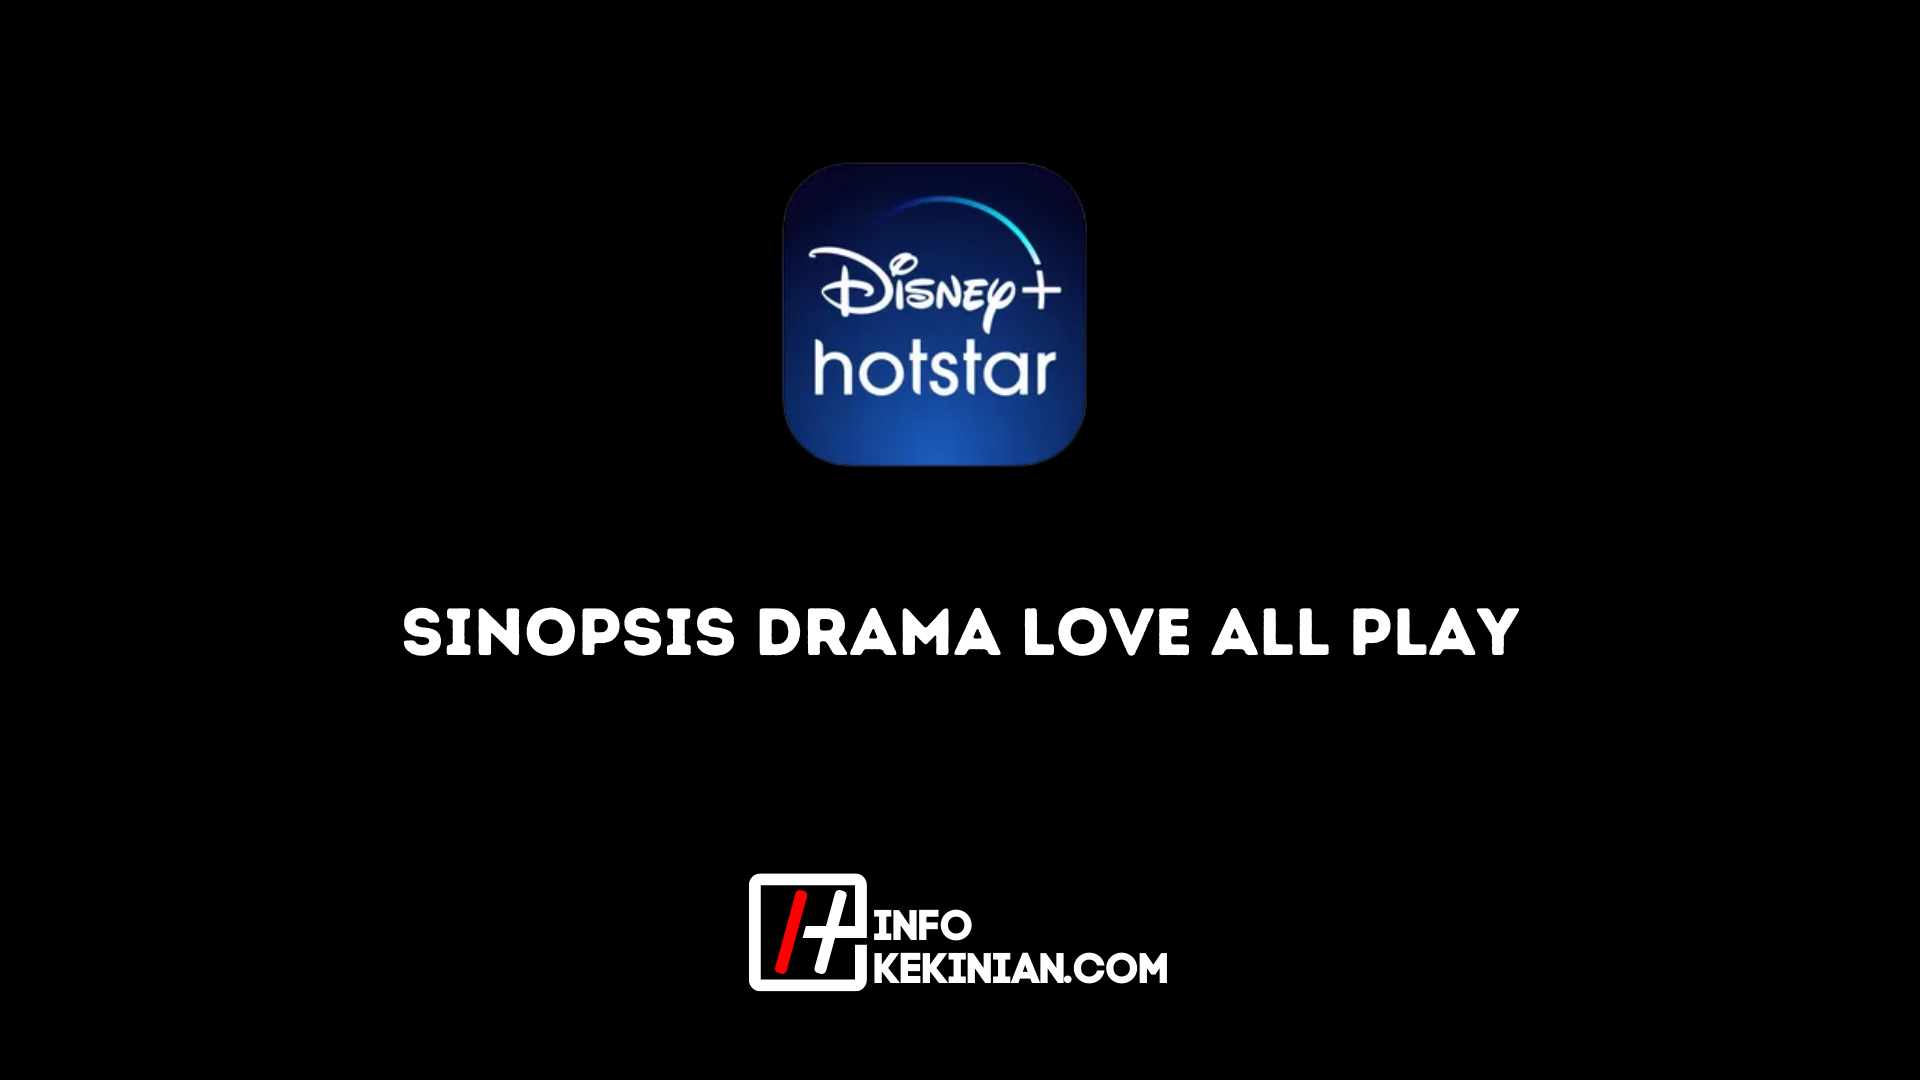 Synopsis Drame Love All Play